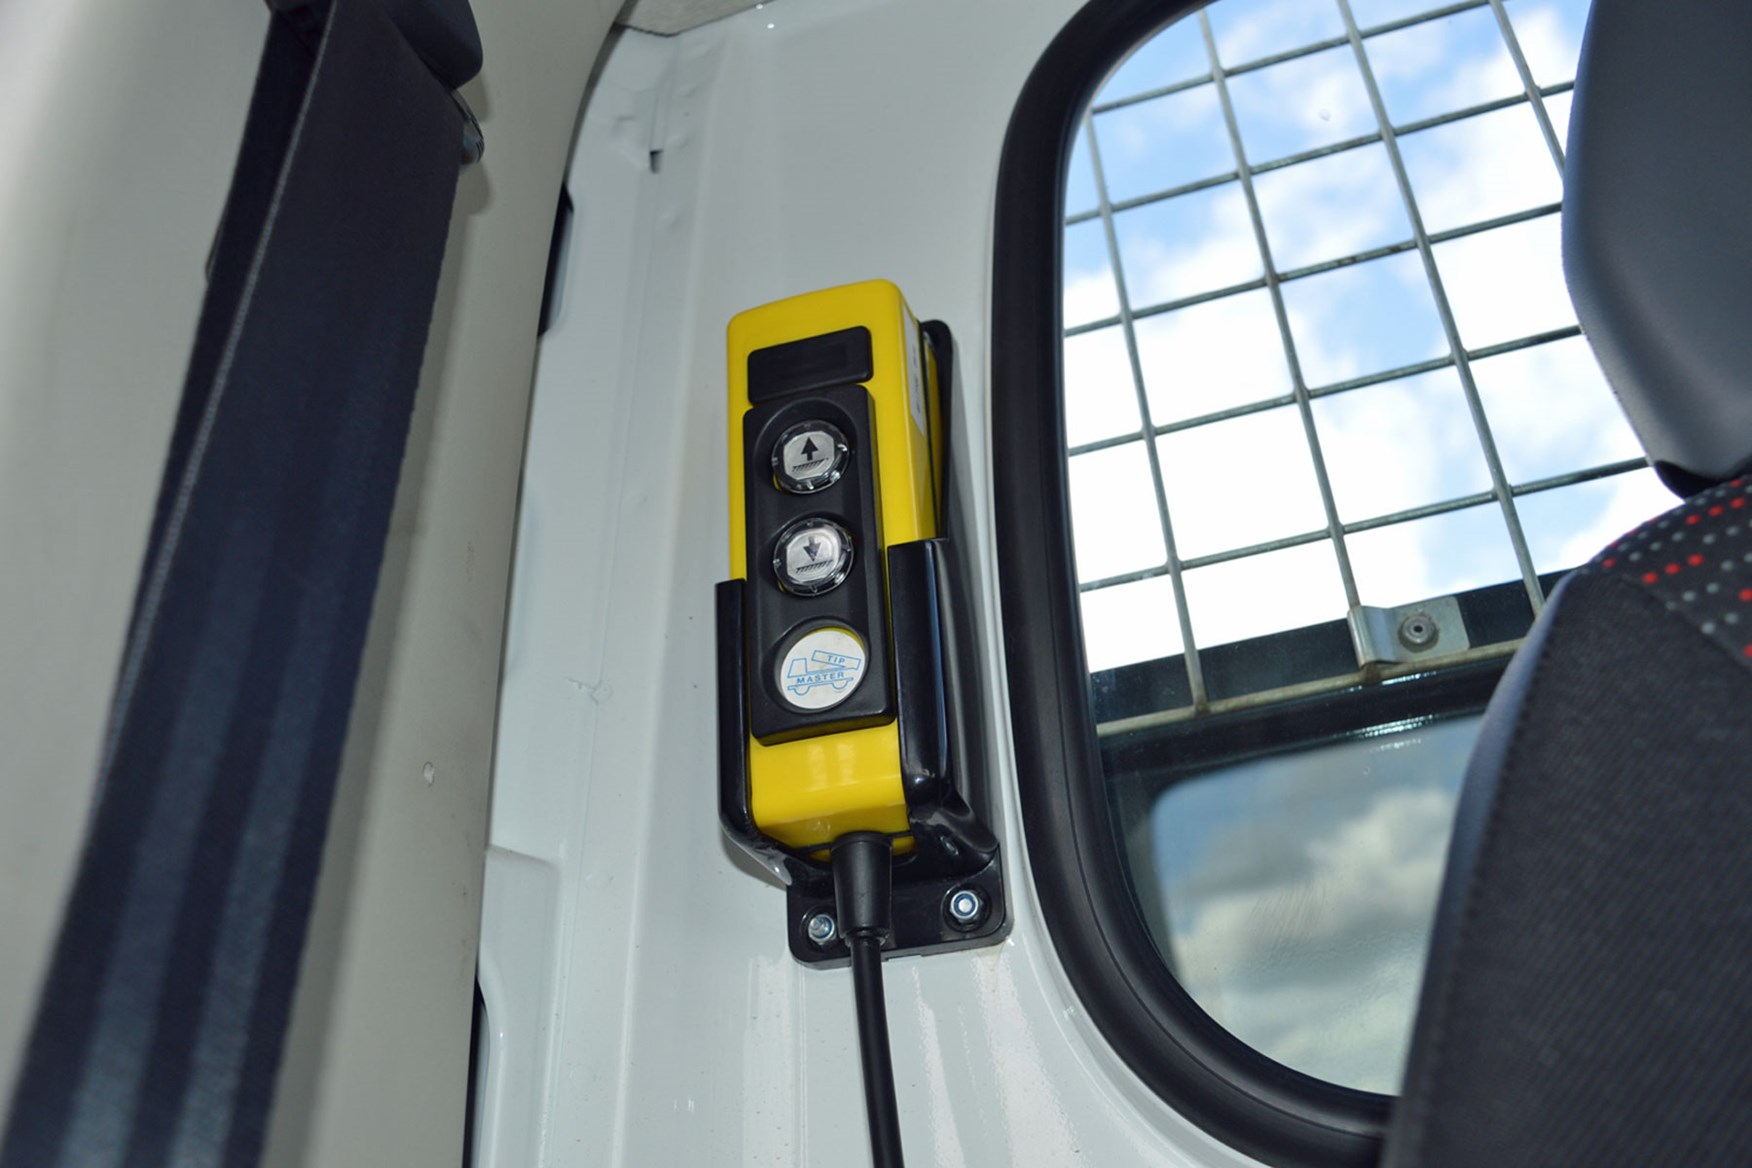 Citroen Relay 2.2 HDi Tipper review - control stored in cab